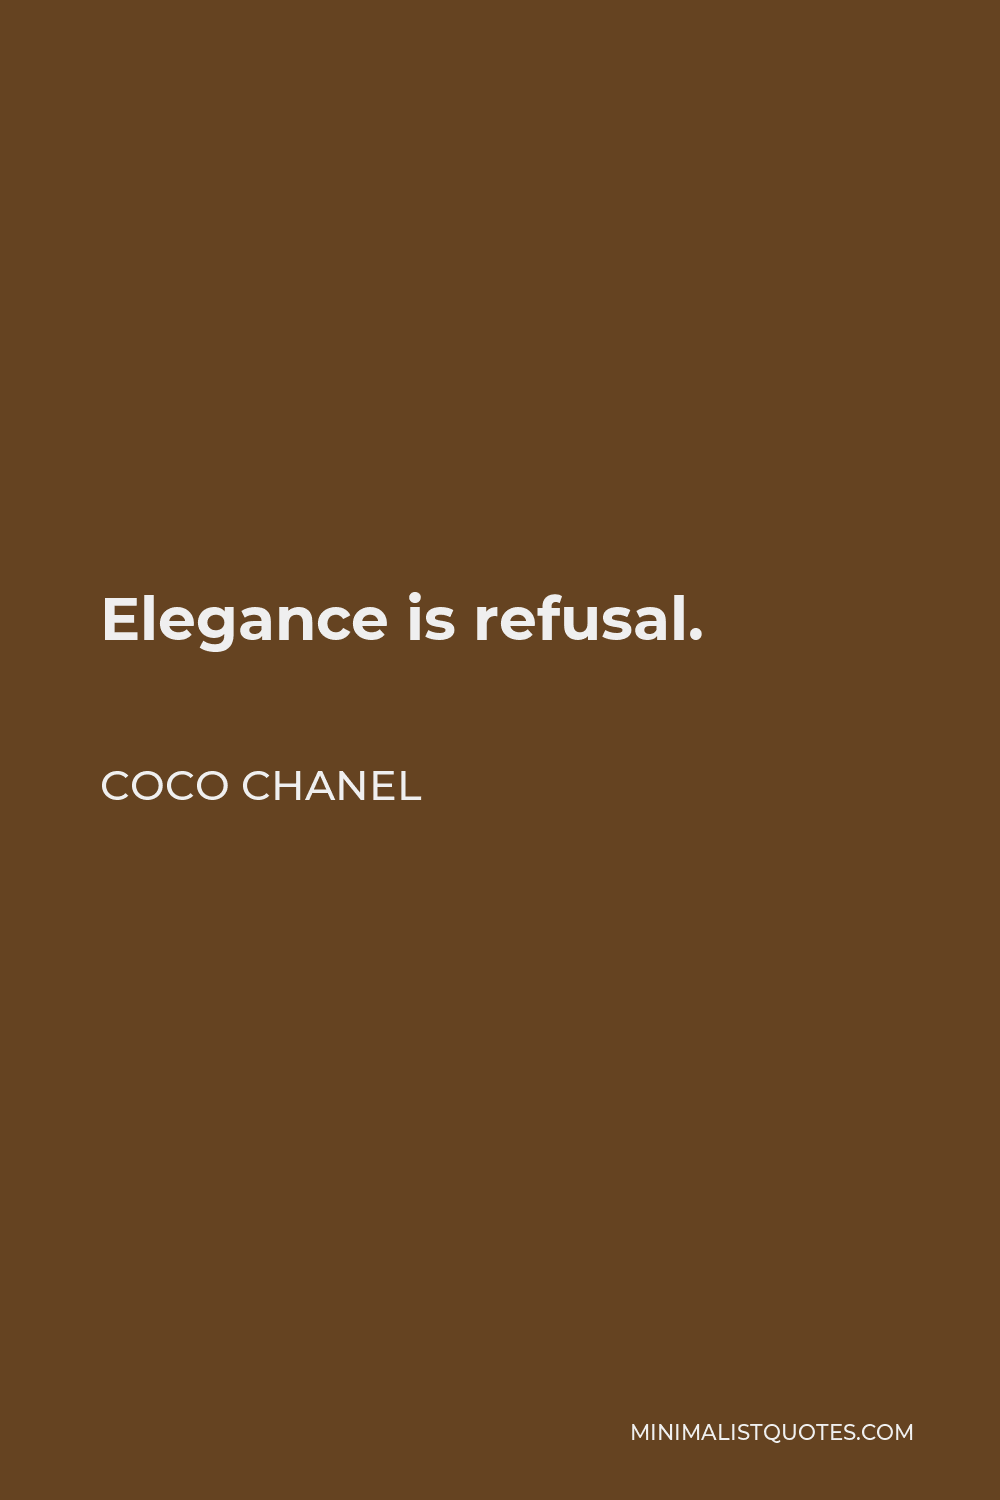 Coco Chanel Quote - Elegance is refusal.